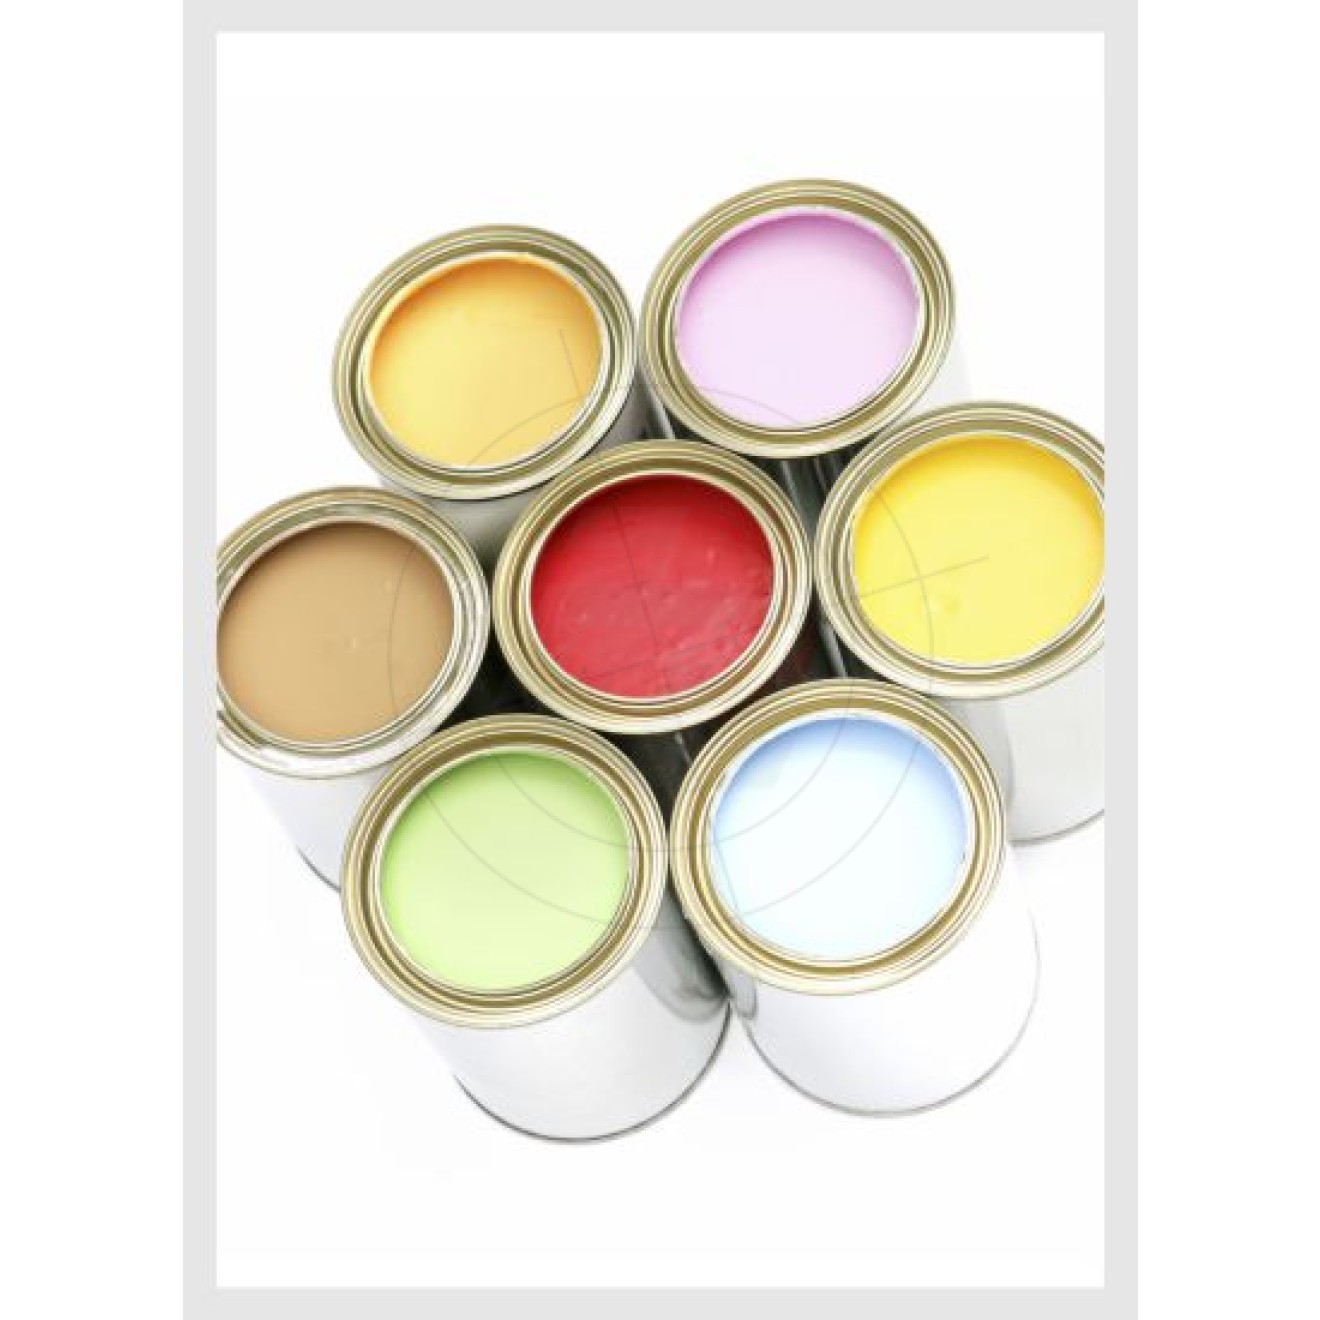 Cans of paint